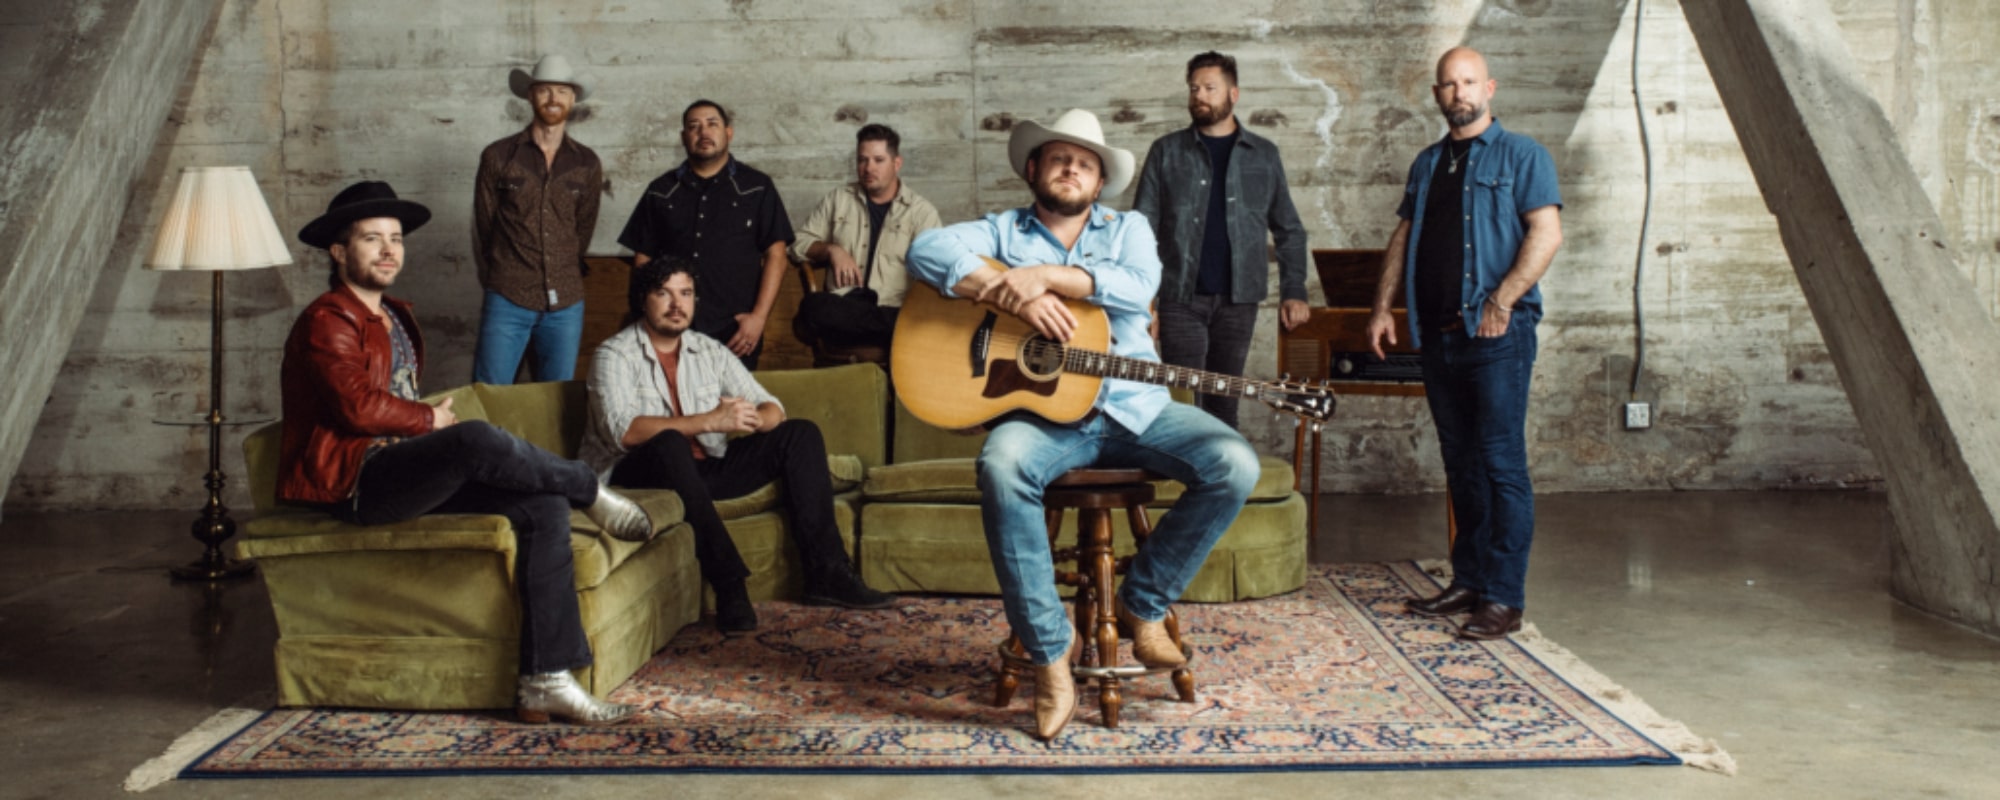 Josh Abbott Band Announces Upcoming Album ‘Somewhere Down the Road’ with New Single “She’ll Always Be”